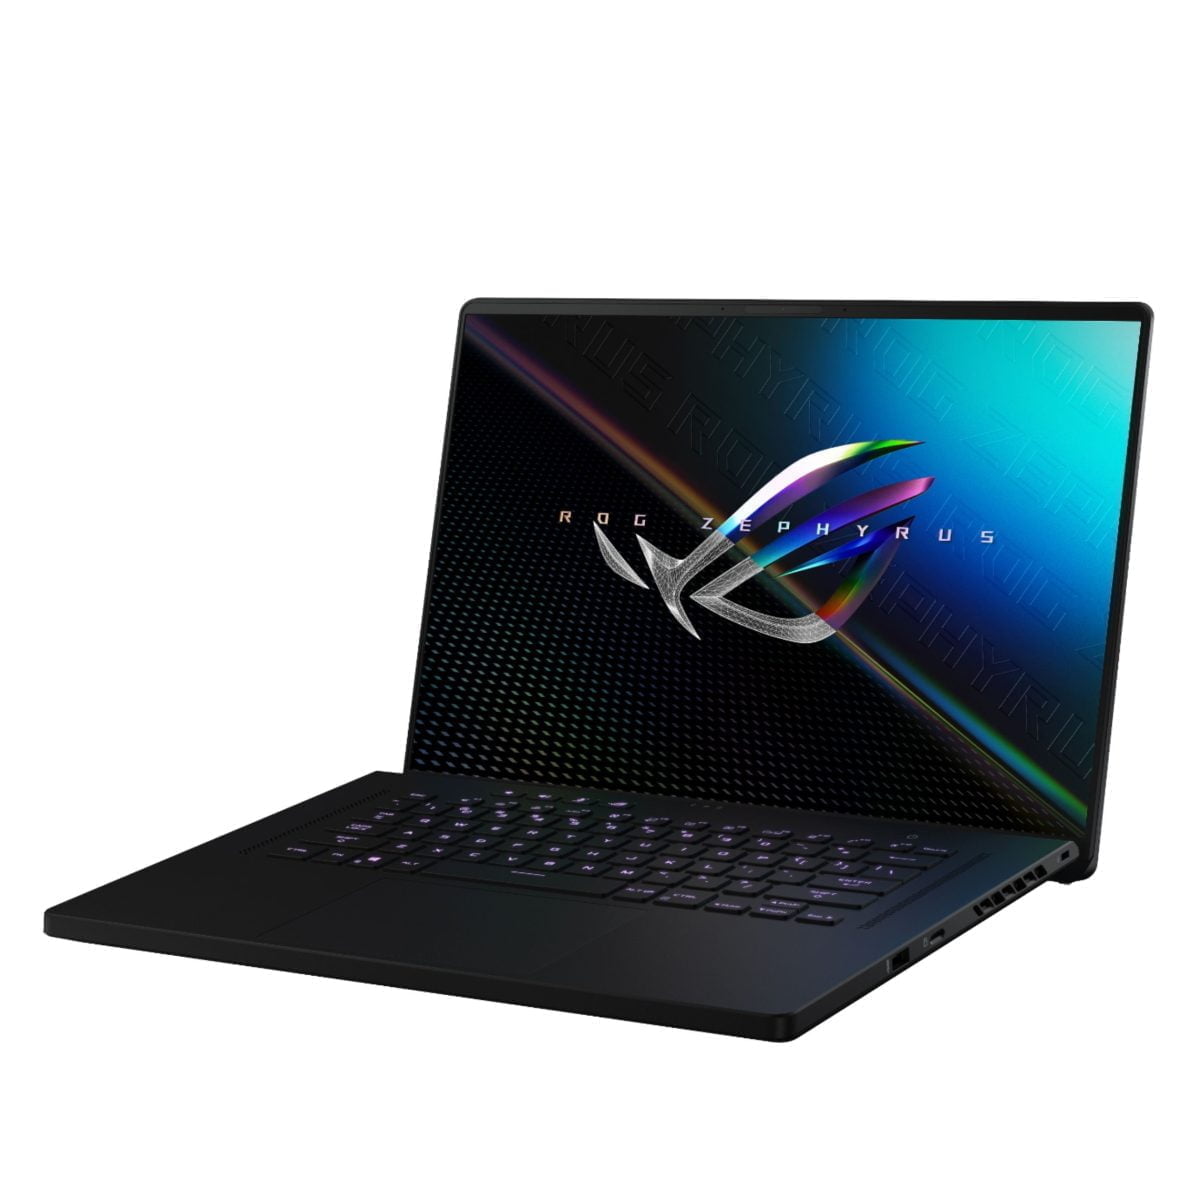 6464203 Rd Scaled Asus &Lt;H1 Class=&Quot;Heading-5 V-Fw-Regular&Quot;&Gt;Asus - Rog 16&Quot; Wuxga 144Hz Gaming Laptop - Intel Core I7 - 16Gb Memory - Nvidia Rtx3050Ti - 512Gb Ssd&Lt;/H1&Gt; Asus Rog Gaming Laptop. Enjoy Everyday Gaming With This Asus Notebook Pc. The 11Th Gen Intel Core I7 Processor And 16Gb Of Ram Let You Run Graphics-Heavy Games Smoothly, While The Potent Nvidia Rtx3050Ti Graphics Produce High-Quality Visuals On The New Fast 16-Inch 144Hz Wuxga Display. This Asus Notebook Pc Has 512Gb Ssd That Shortens Load Times And Offers Ample Storage. Asus Rog Gaming Laptop Asus - Rog 16&Quot; Wuxga 144Hz Gaming Laptop - Intel Core I7 - 16Gb Memory - Nvidia Rtx3050Ti - 512Gb Ssd